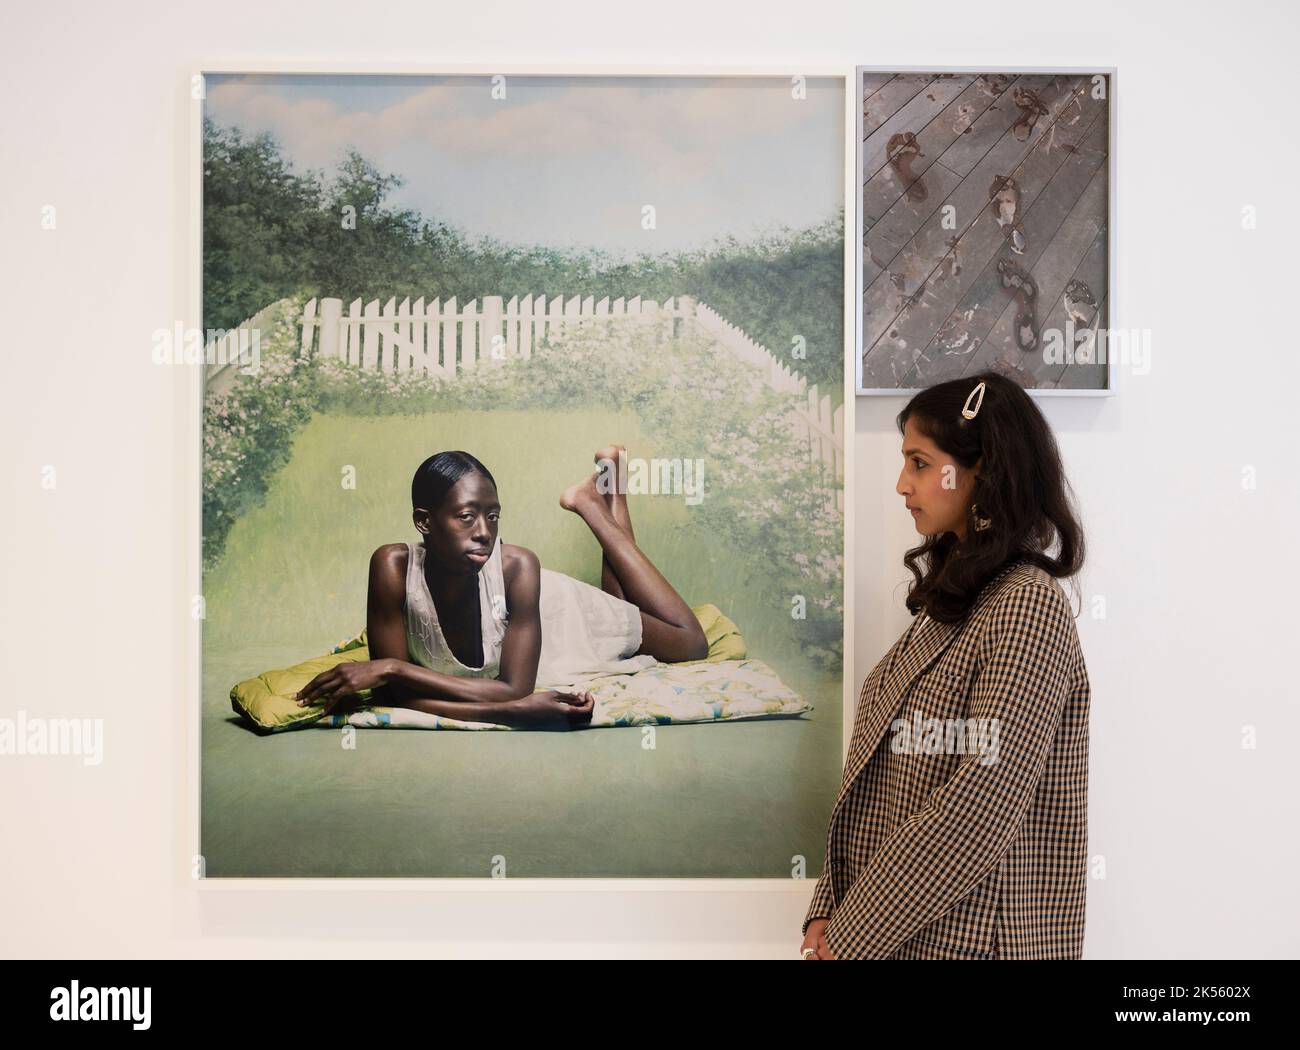 Gagosian, London. UK. 6 October 2022. Chrysalis is an exhibition of new photographs by Tyler Mitchell exploring themes of Black history and Southern identity in “Chrysalis,” his first solo exhibition at Gagosian, London. Image: Cage, 2022. Credit: Malcolm Park/Alamy Live News. Stock Photo